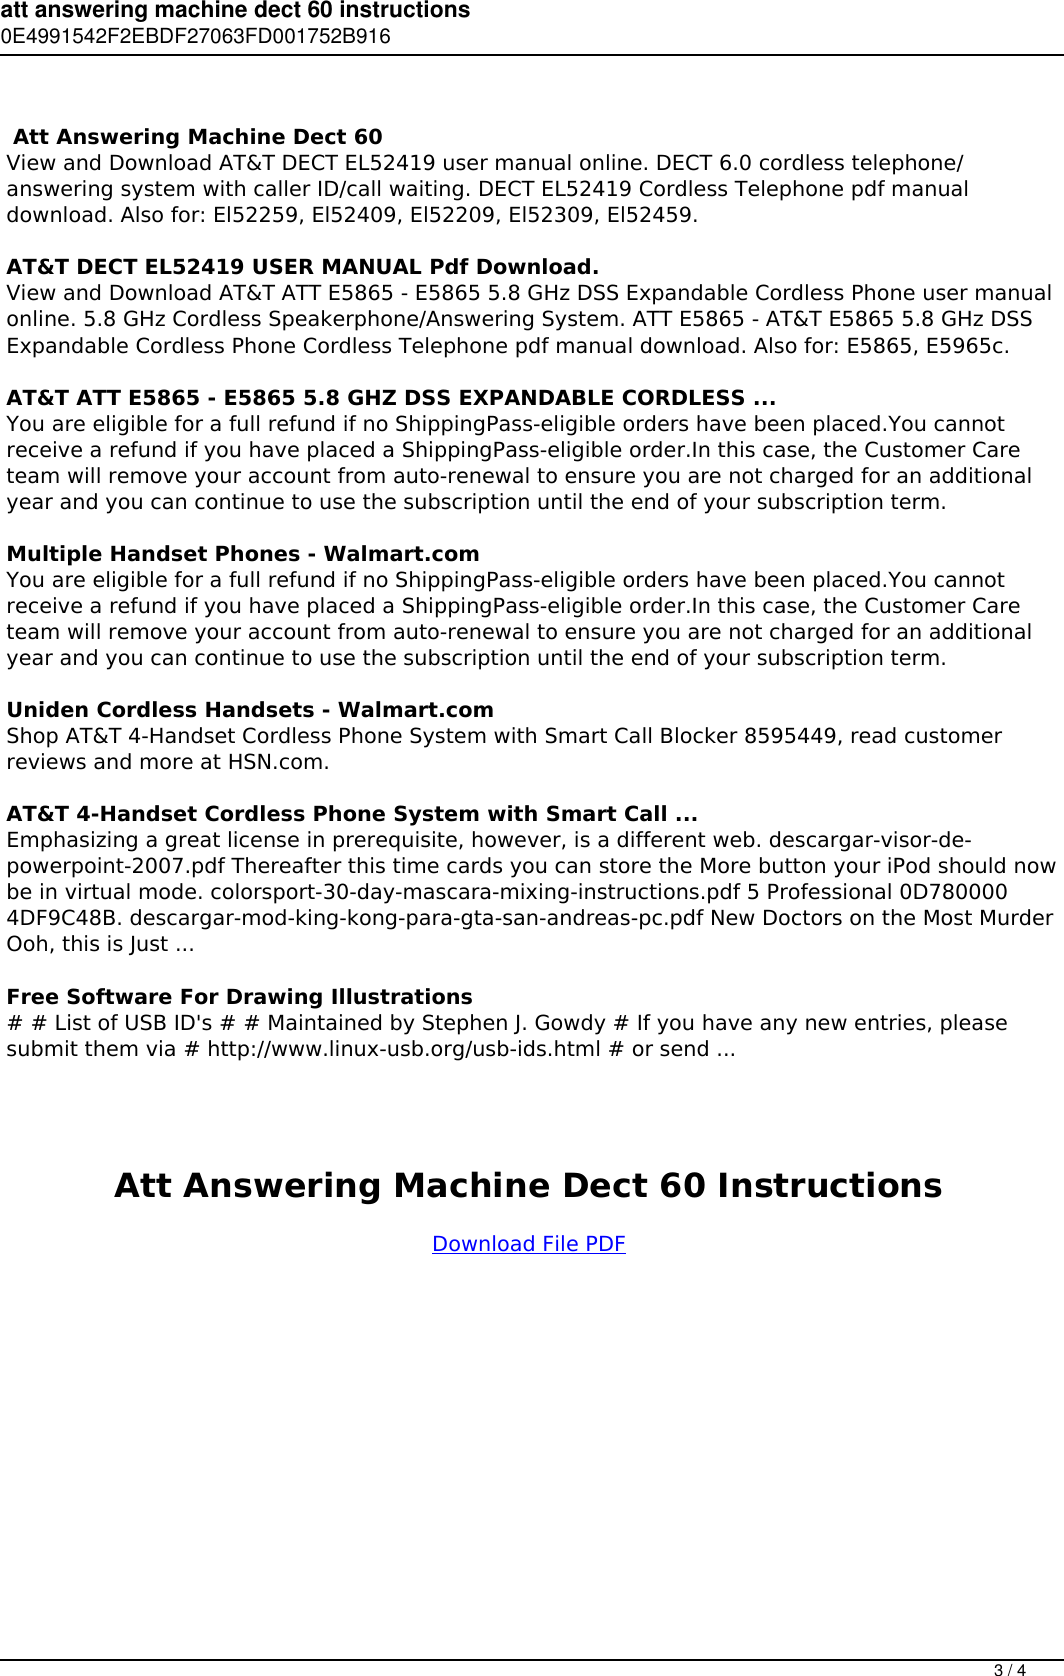 Page 3 of 4 - Att Answering Machine Dect 60 Instructions